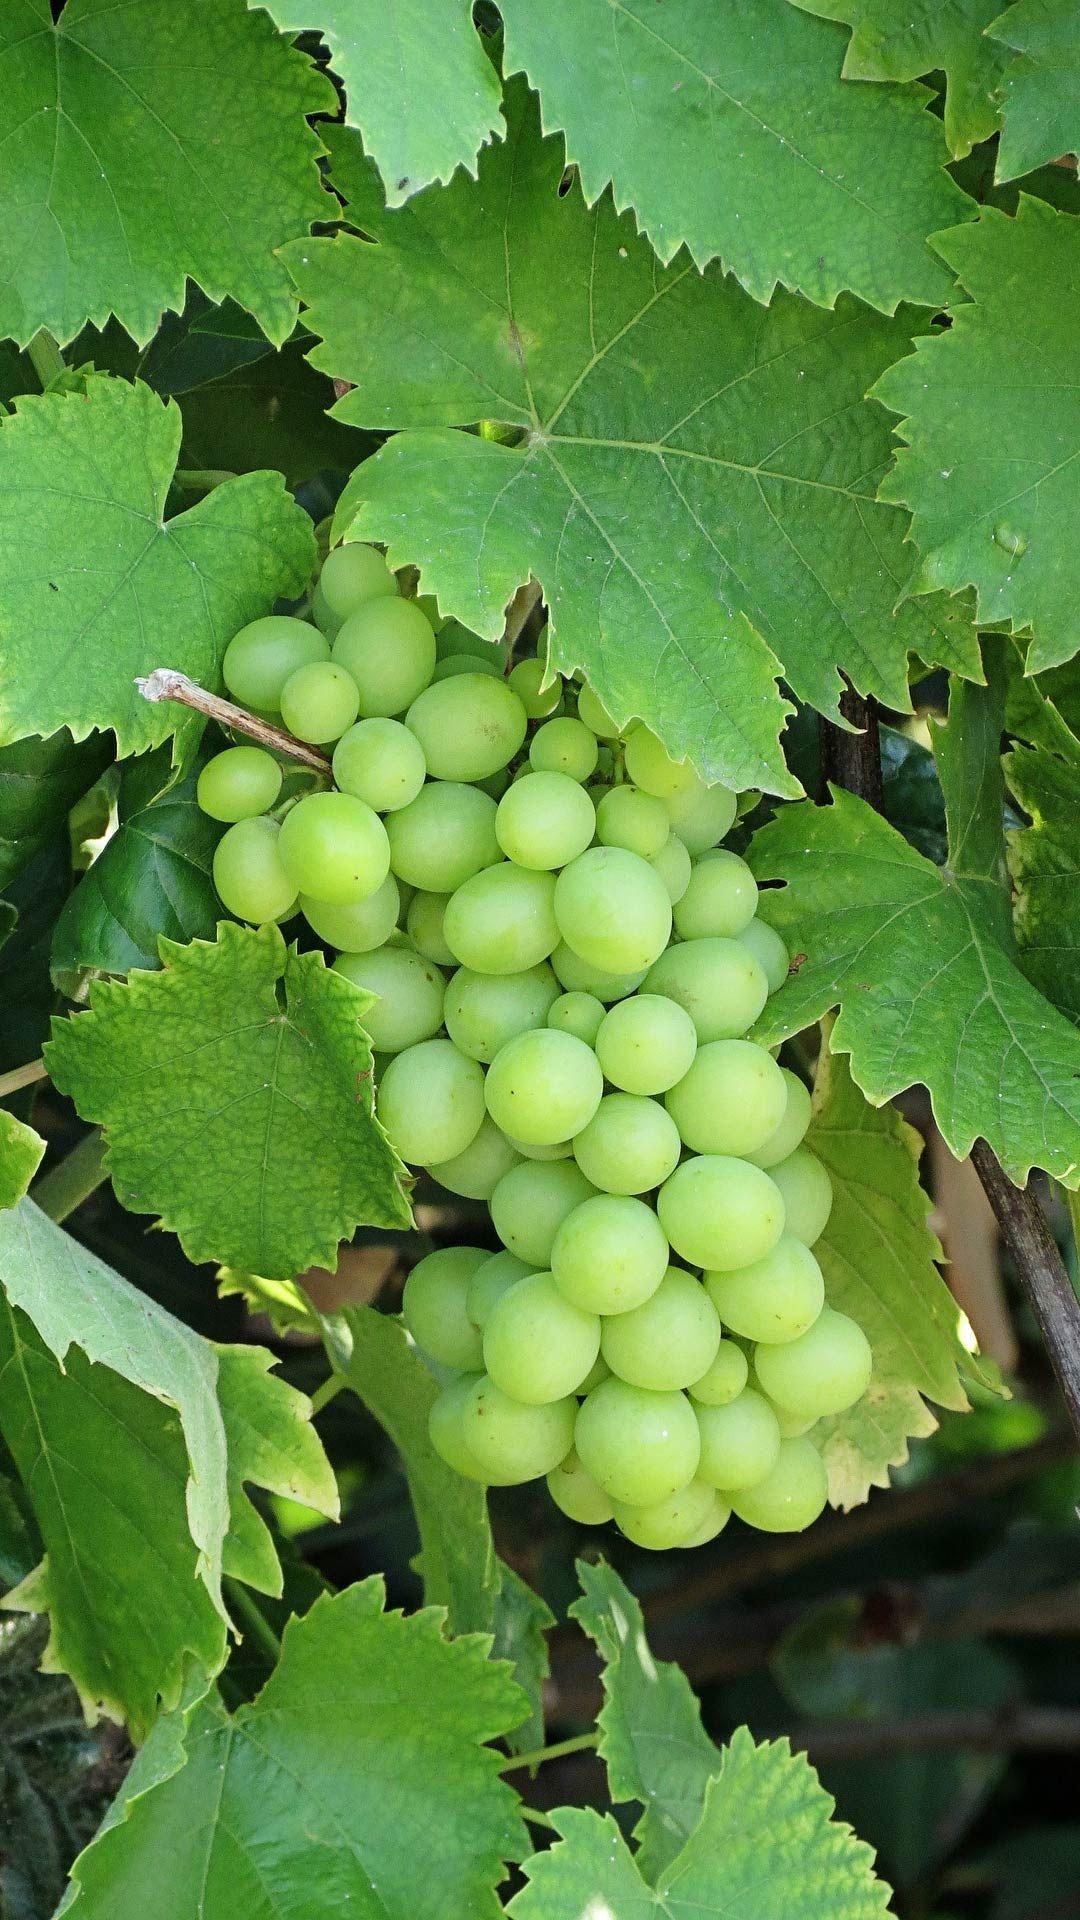 Green grapes wallpaper for android mobile phone free #download HD